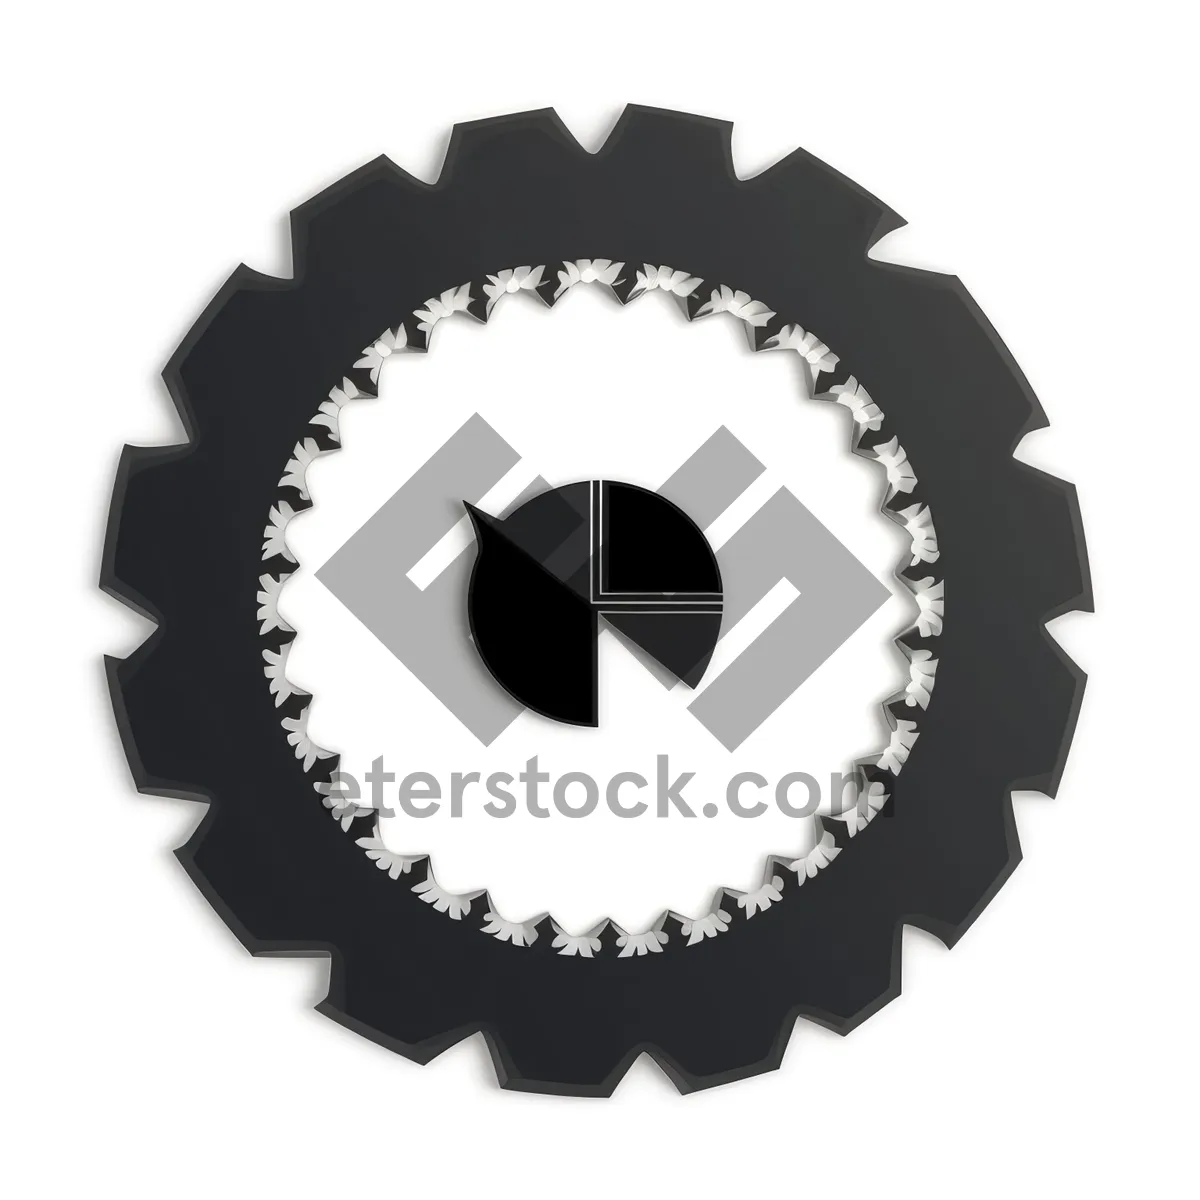 Picture of Precision Power Gears: The Ultimate Industrial Machinery